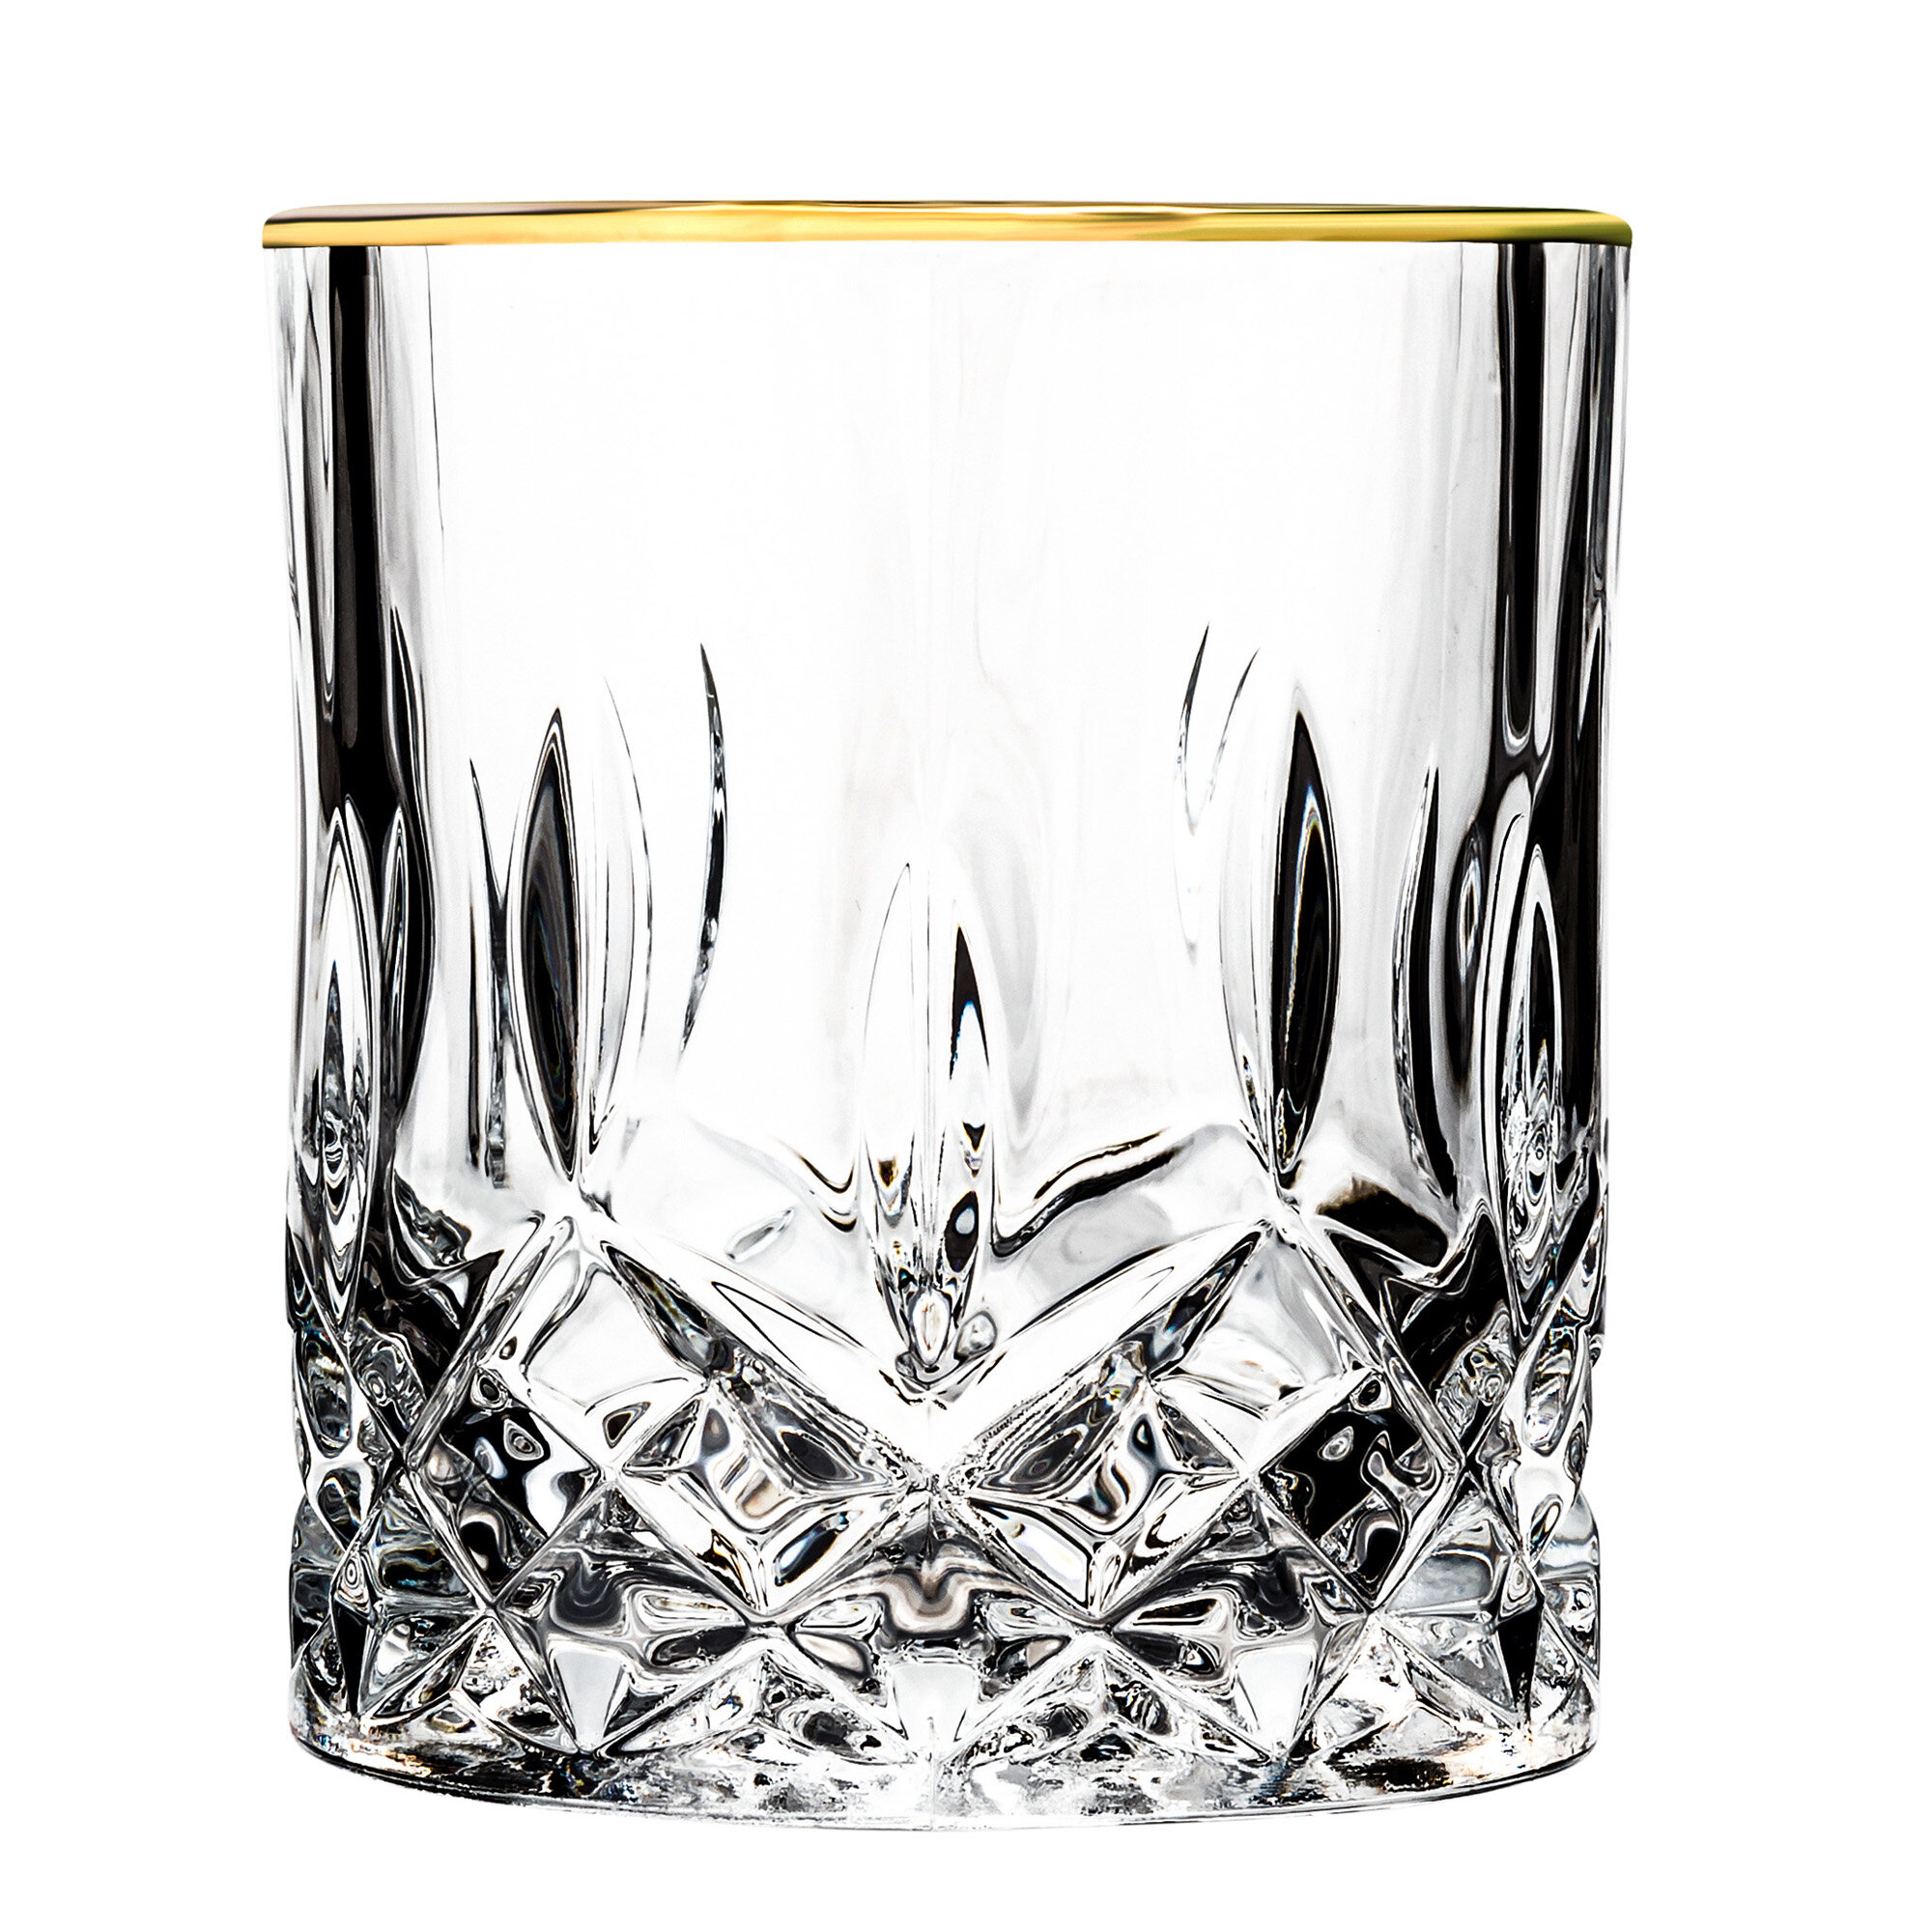 Toscany Gold Rimmed Lead Crystal Old Fashioned Whiskey Glasses